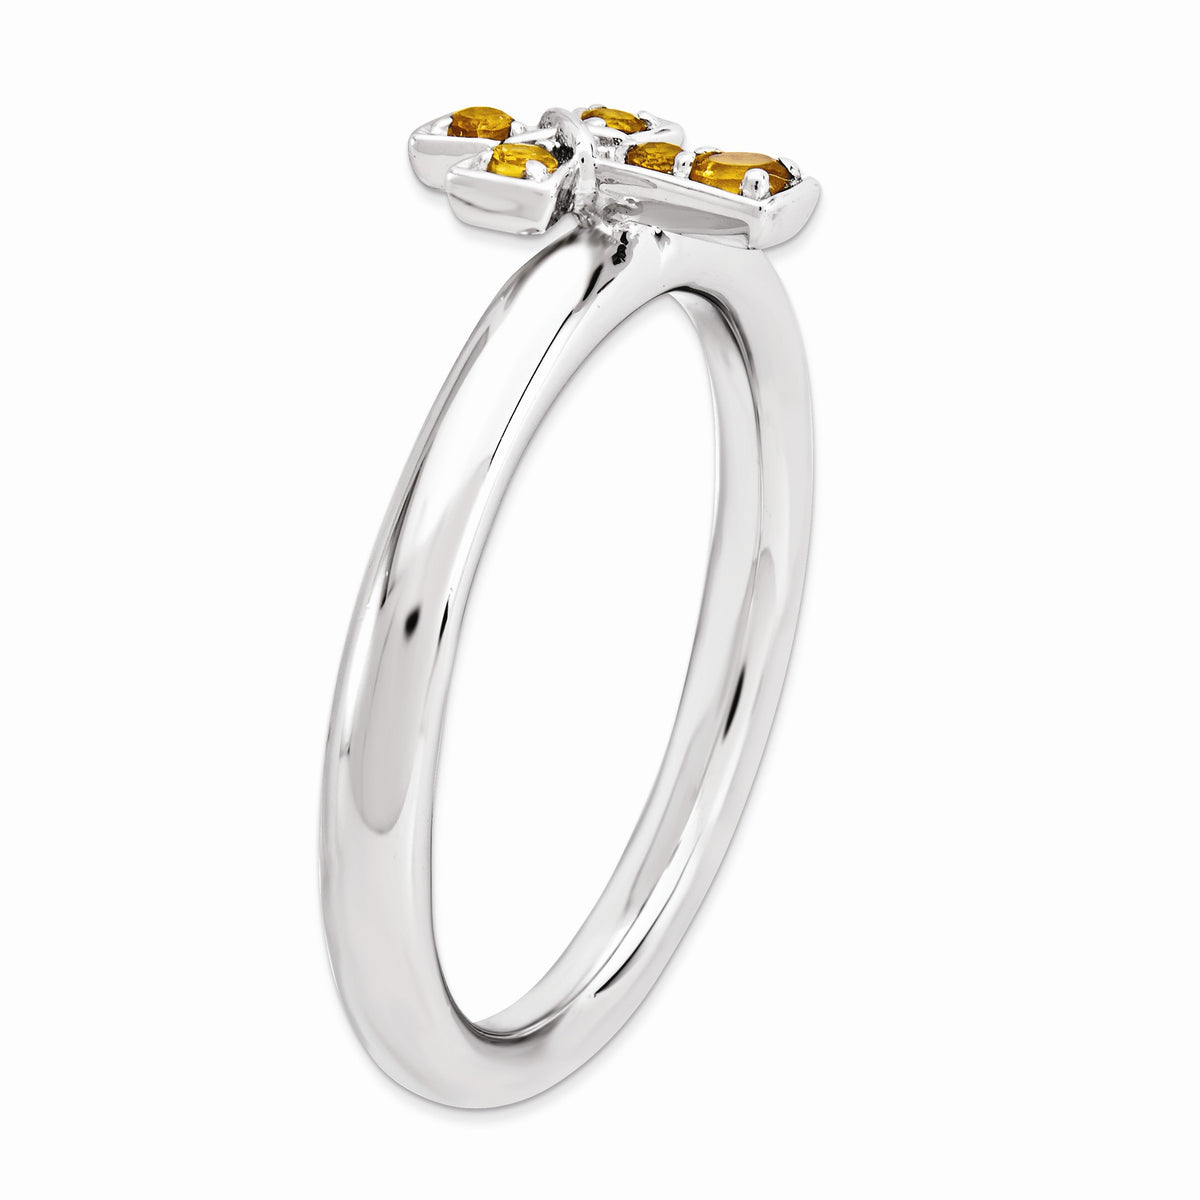 Alternate view of the Rhodium Plated Sterling Silver Stackable Citrine 9mm Cross Ring by The Black Bow Jewelry Co.